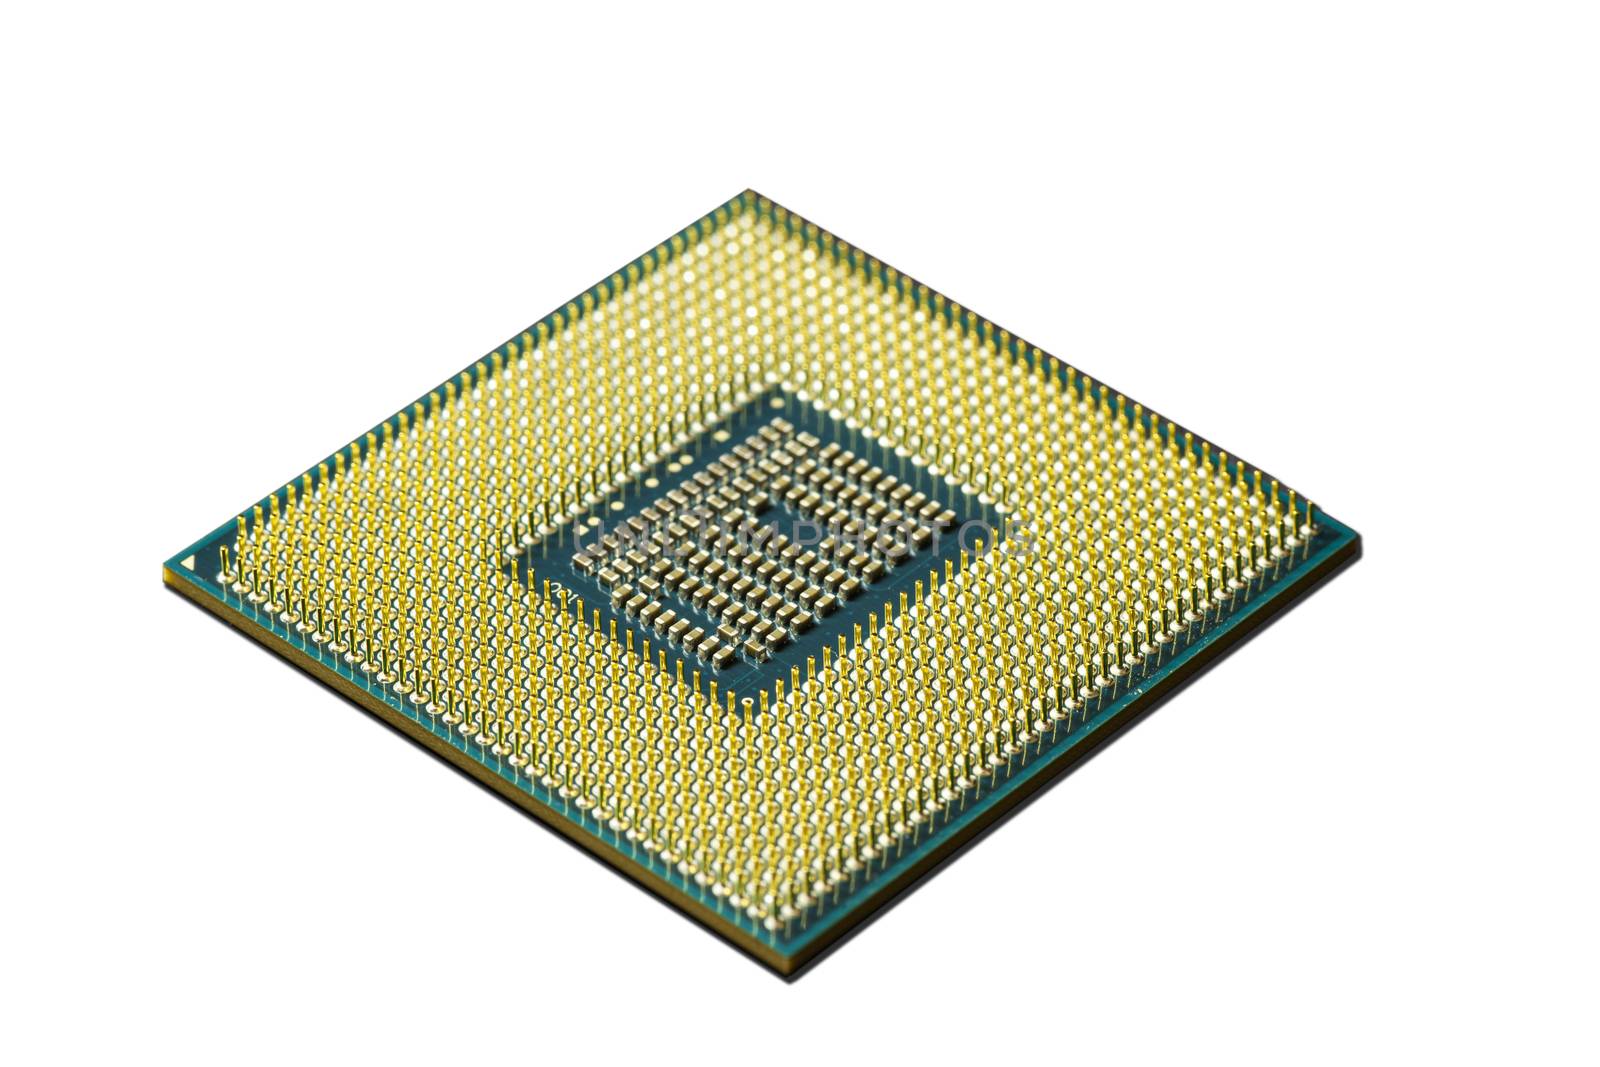 Processor chip detail by pippocarlot